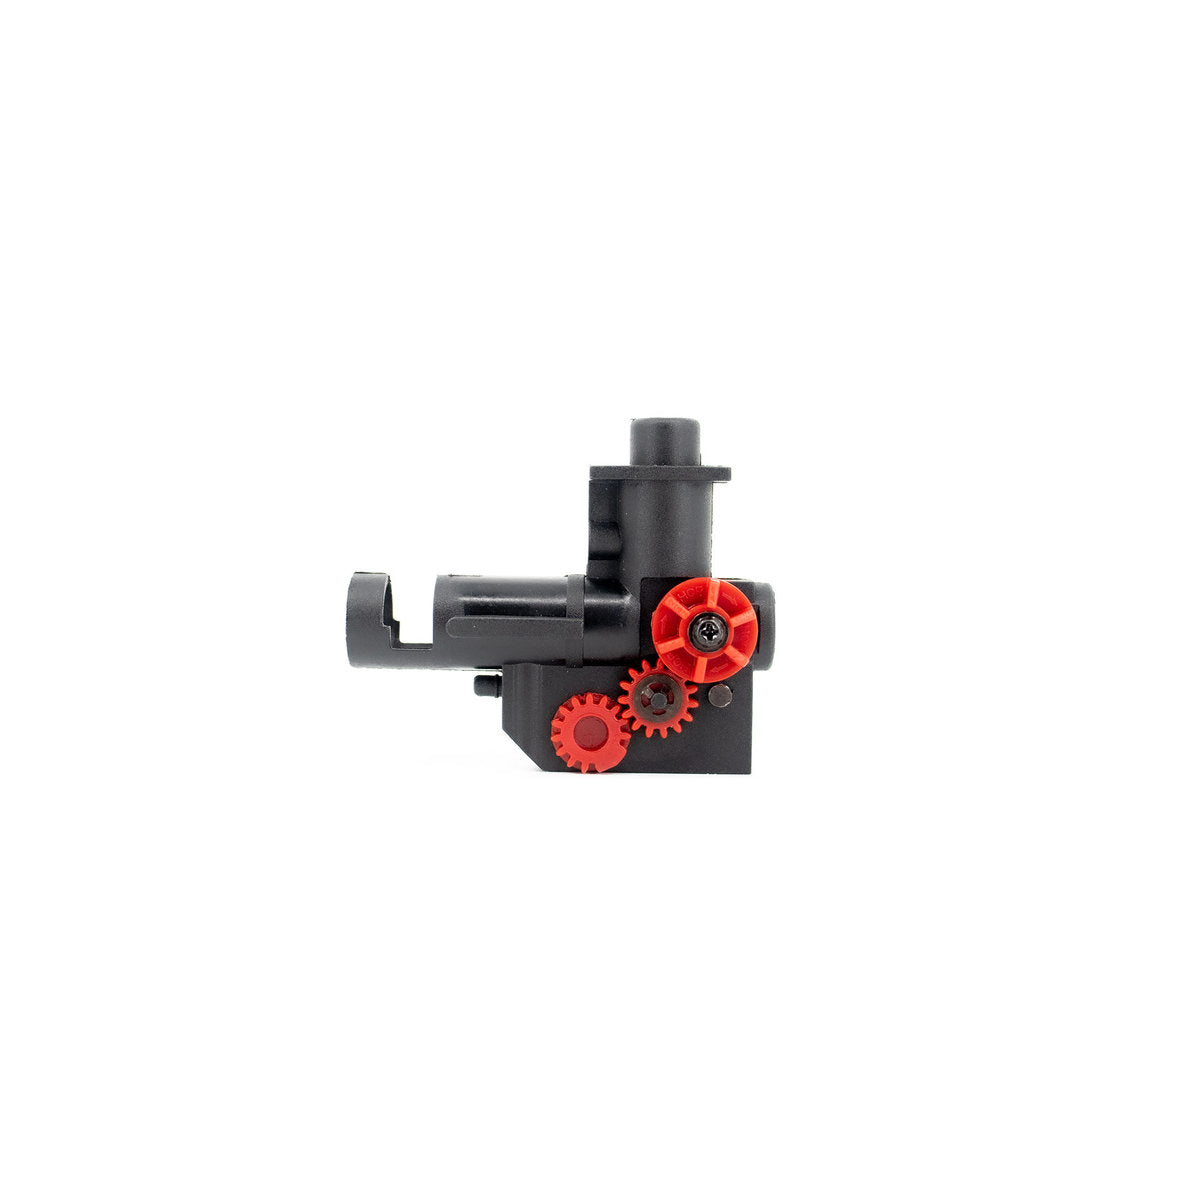 Rifle Parts - Alloy Series Aeg Hop Up Assembly